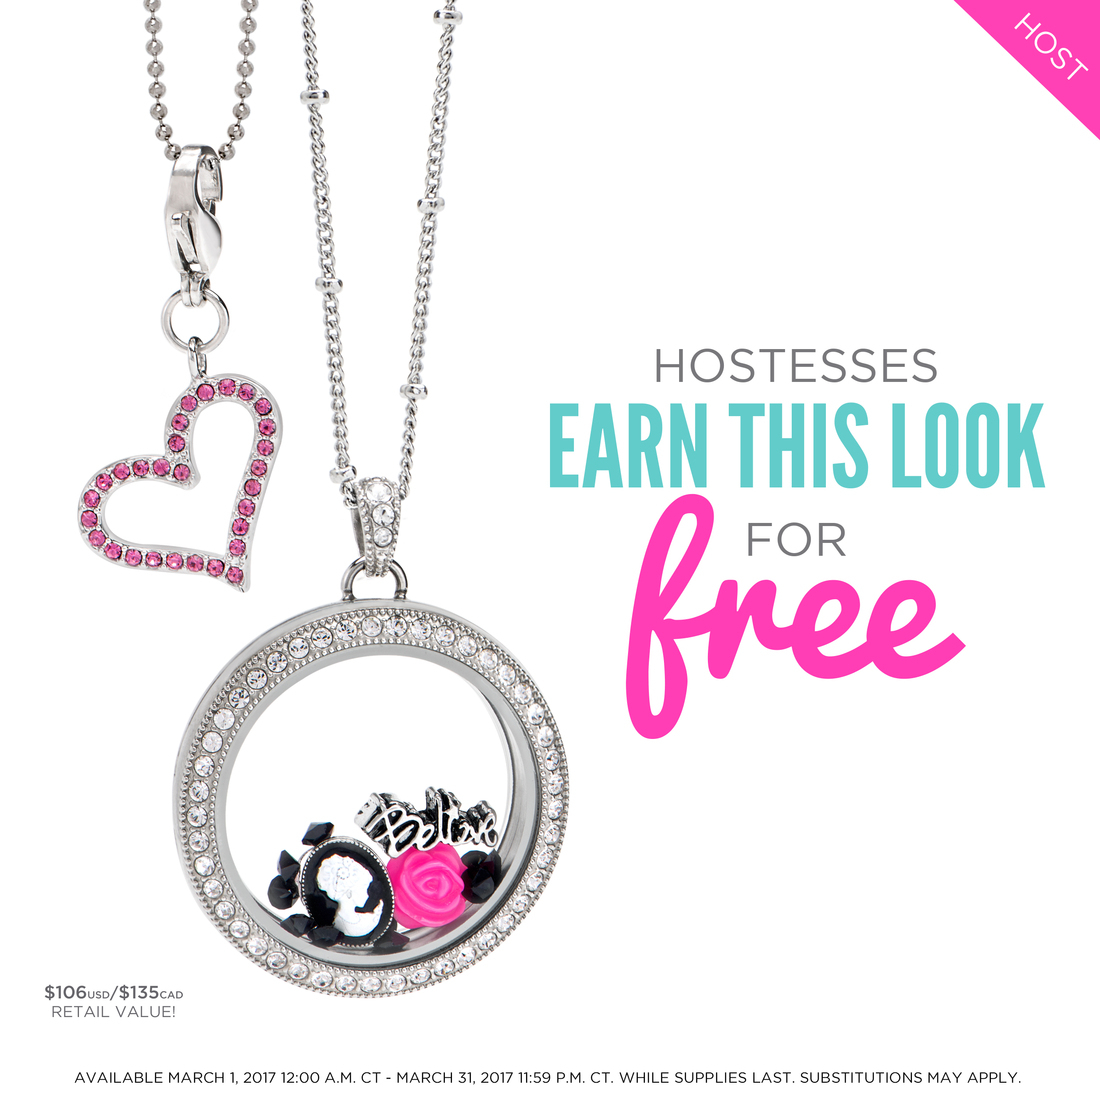 Origami Owl Ball Chain March Origami Owl Hostess Exclusive Direct Sales And Home Based